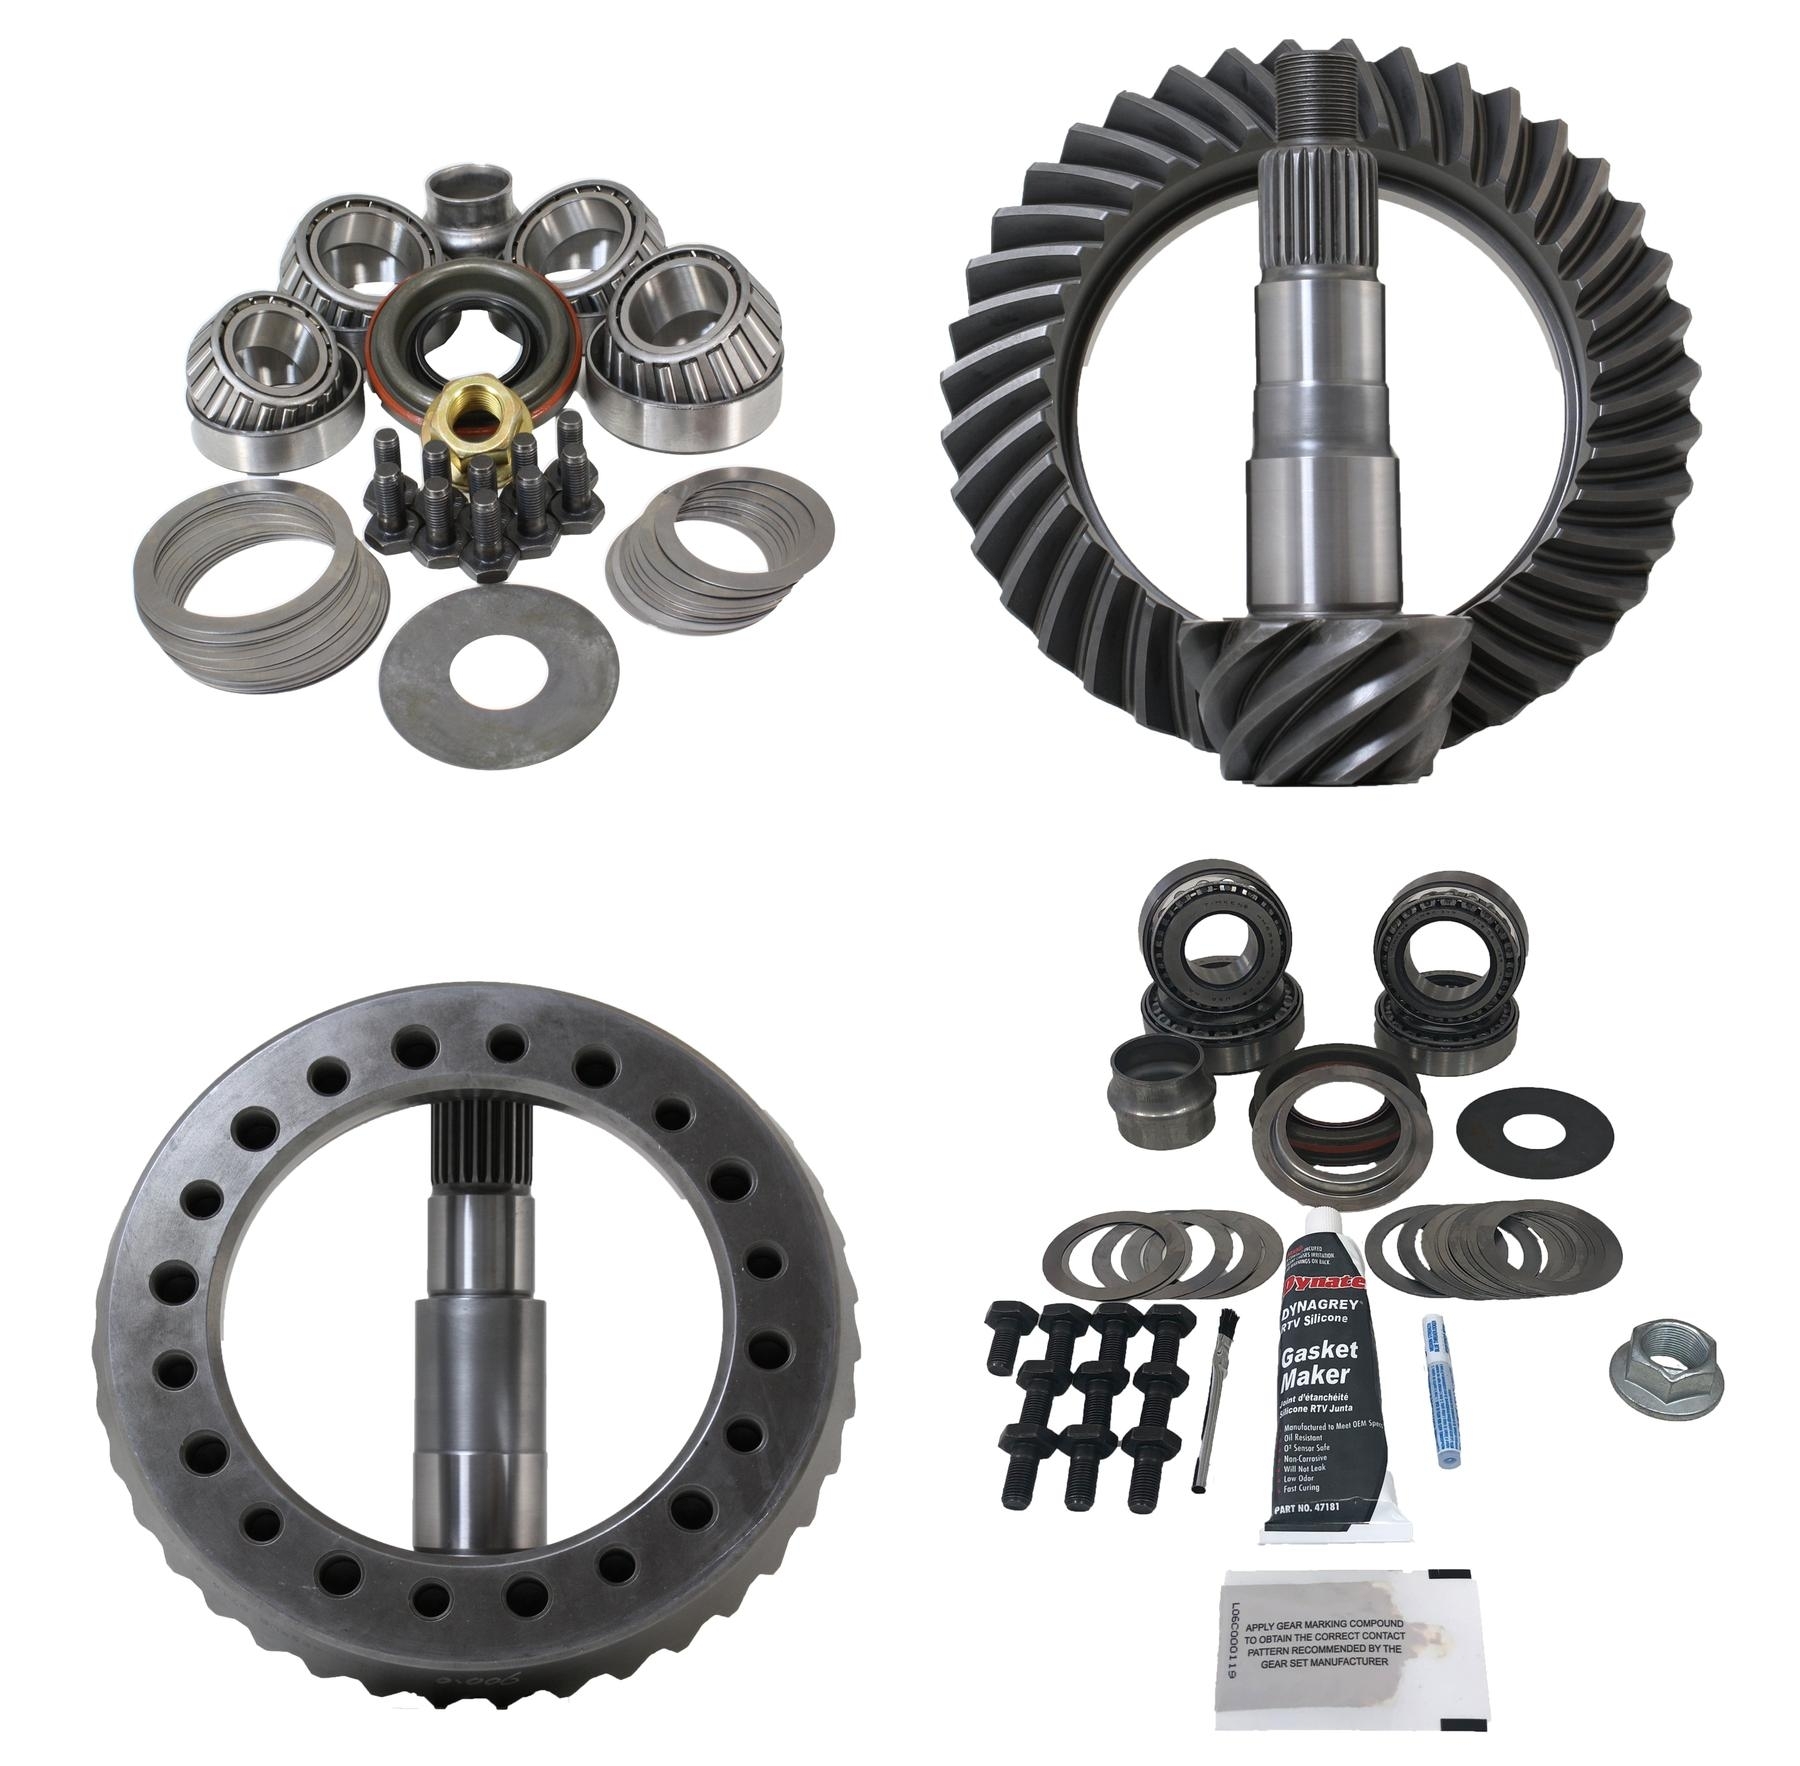 Revolution Gear & Axle Front And Rear Gear Package Without Factory Locker, T8.4, T7.5 Reverse, 5.13